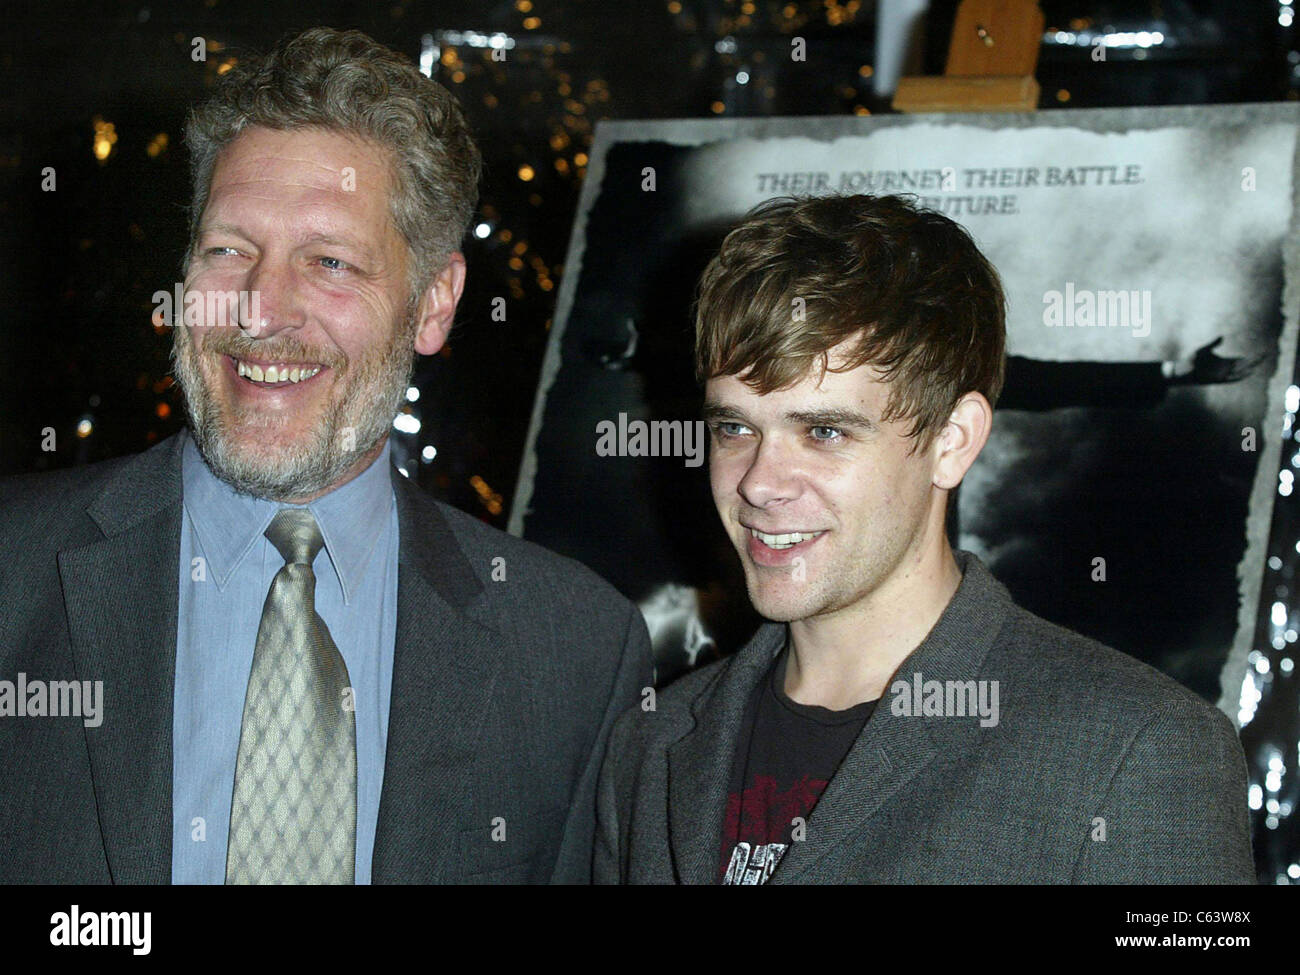 Clancy Brown, Nick Stahl at HBO Carnivale 2nd Season Premiere Party, Los Angeles, CA January 06, 2005. Photo by: Emilio Flores/Everett Collection Stock Photo